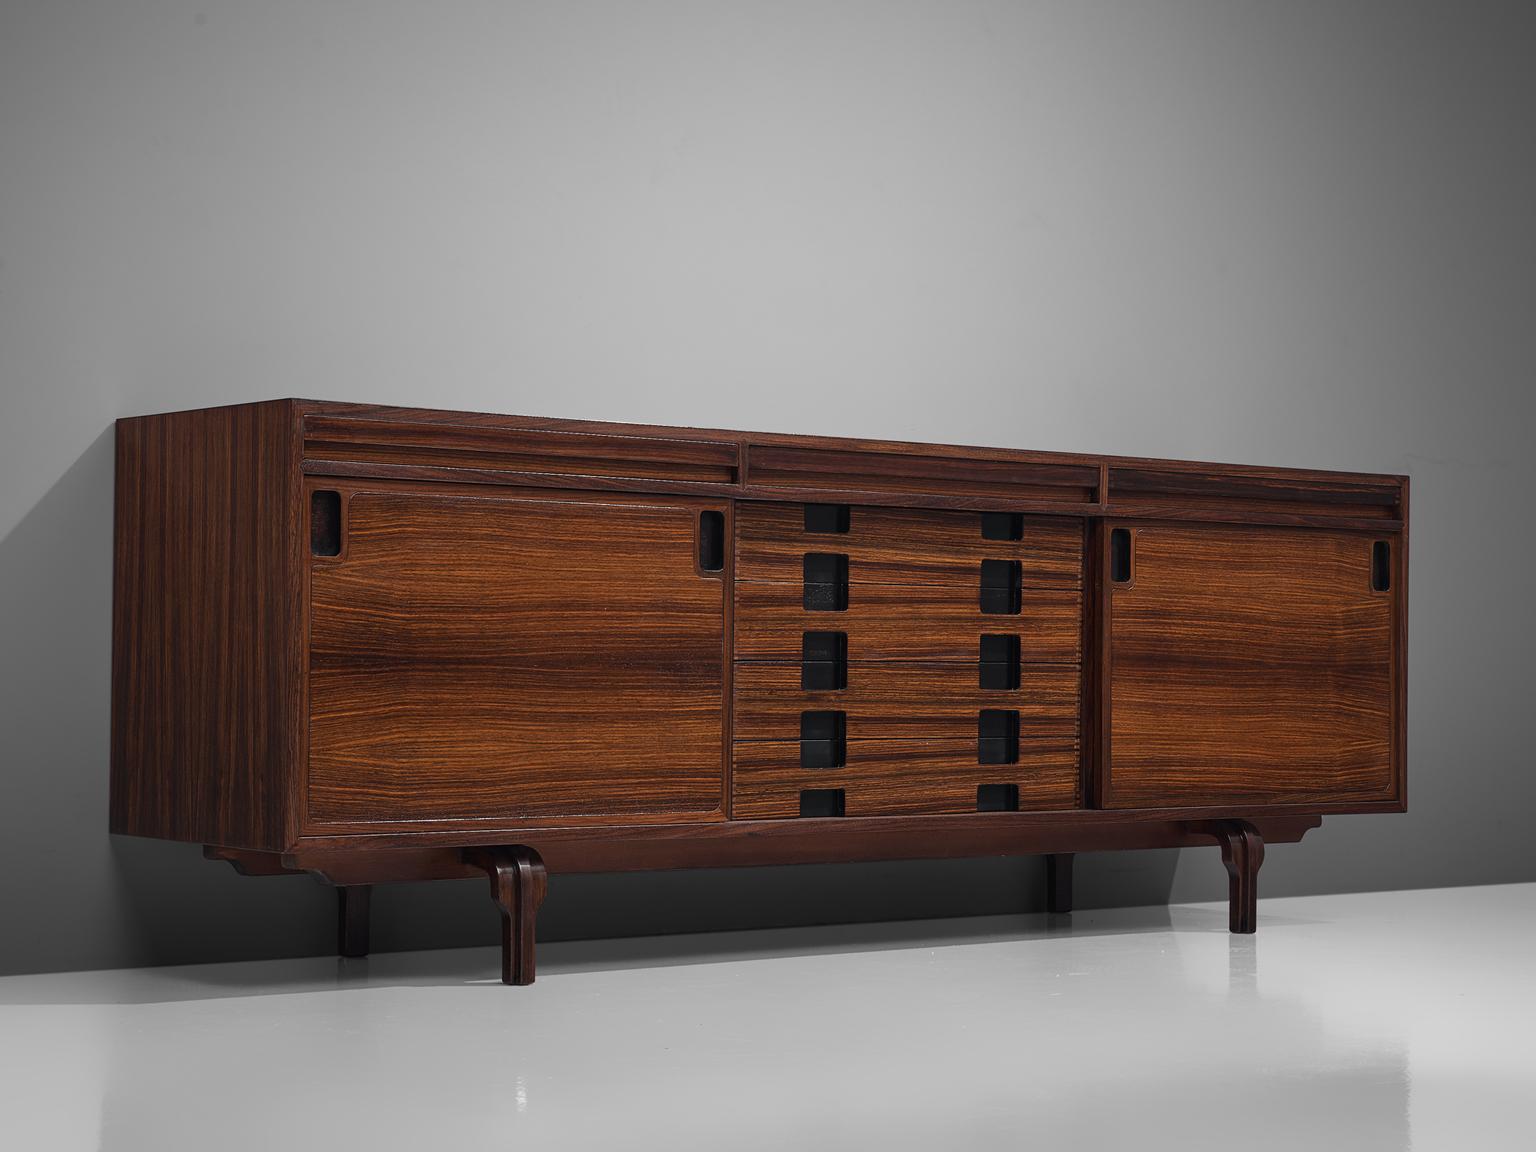 Luigi Massoni, sideboard, rosewood, Italy, 1960s

This Italian credenza designed by Luigi Massoni is executed in rosewood. It consists of two sliding doors with characteristic black handles and four drawers. The cut-out handles are rectangular